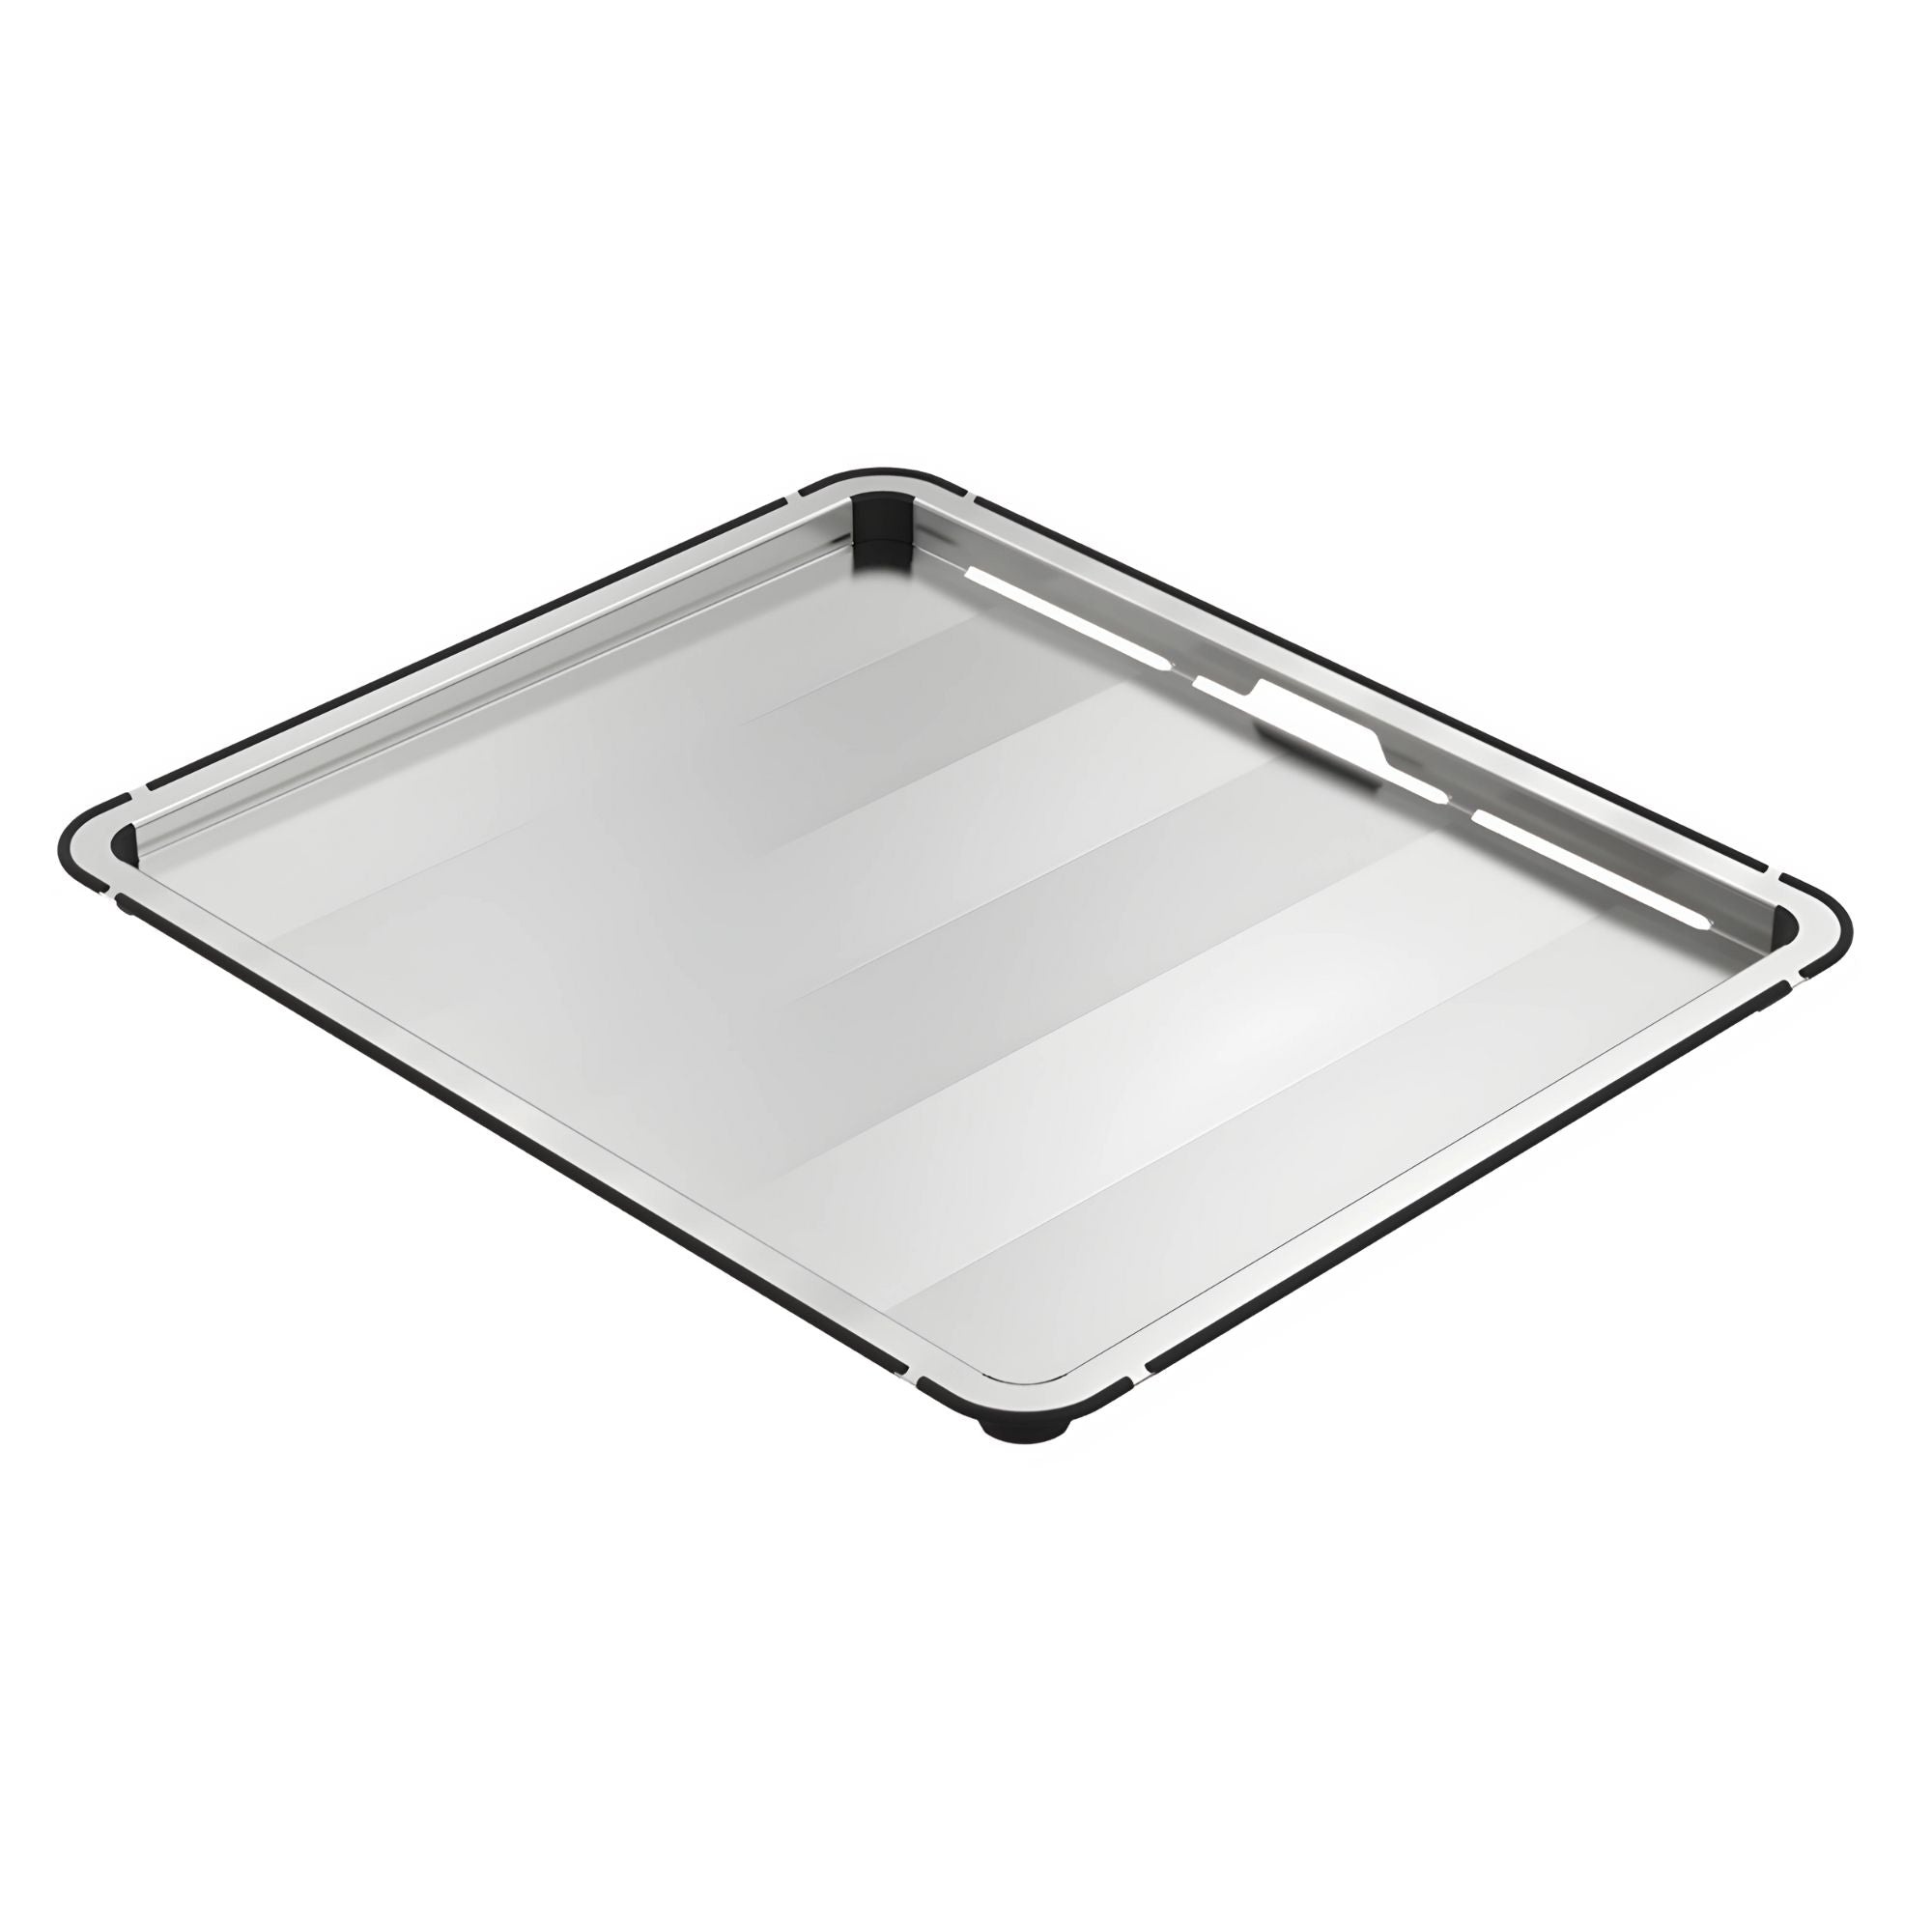 ABEY LUCIA SINGLE BOWL KITCHEN SINK STAINLESS STEEL 380MM